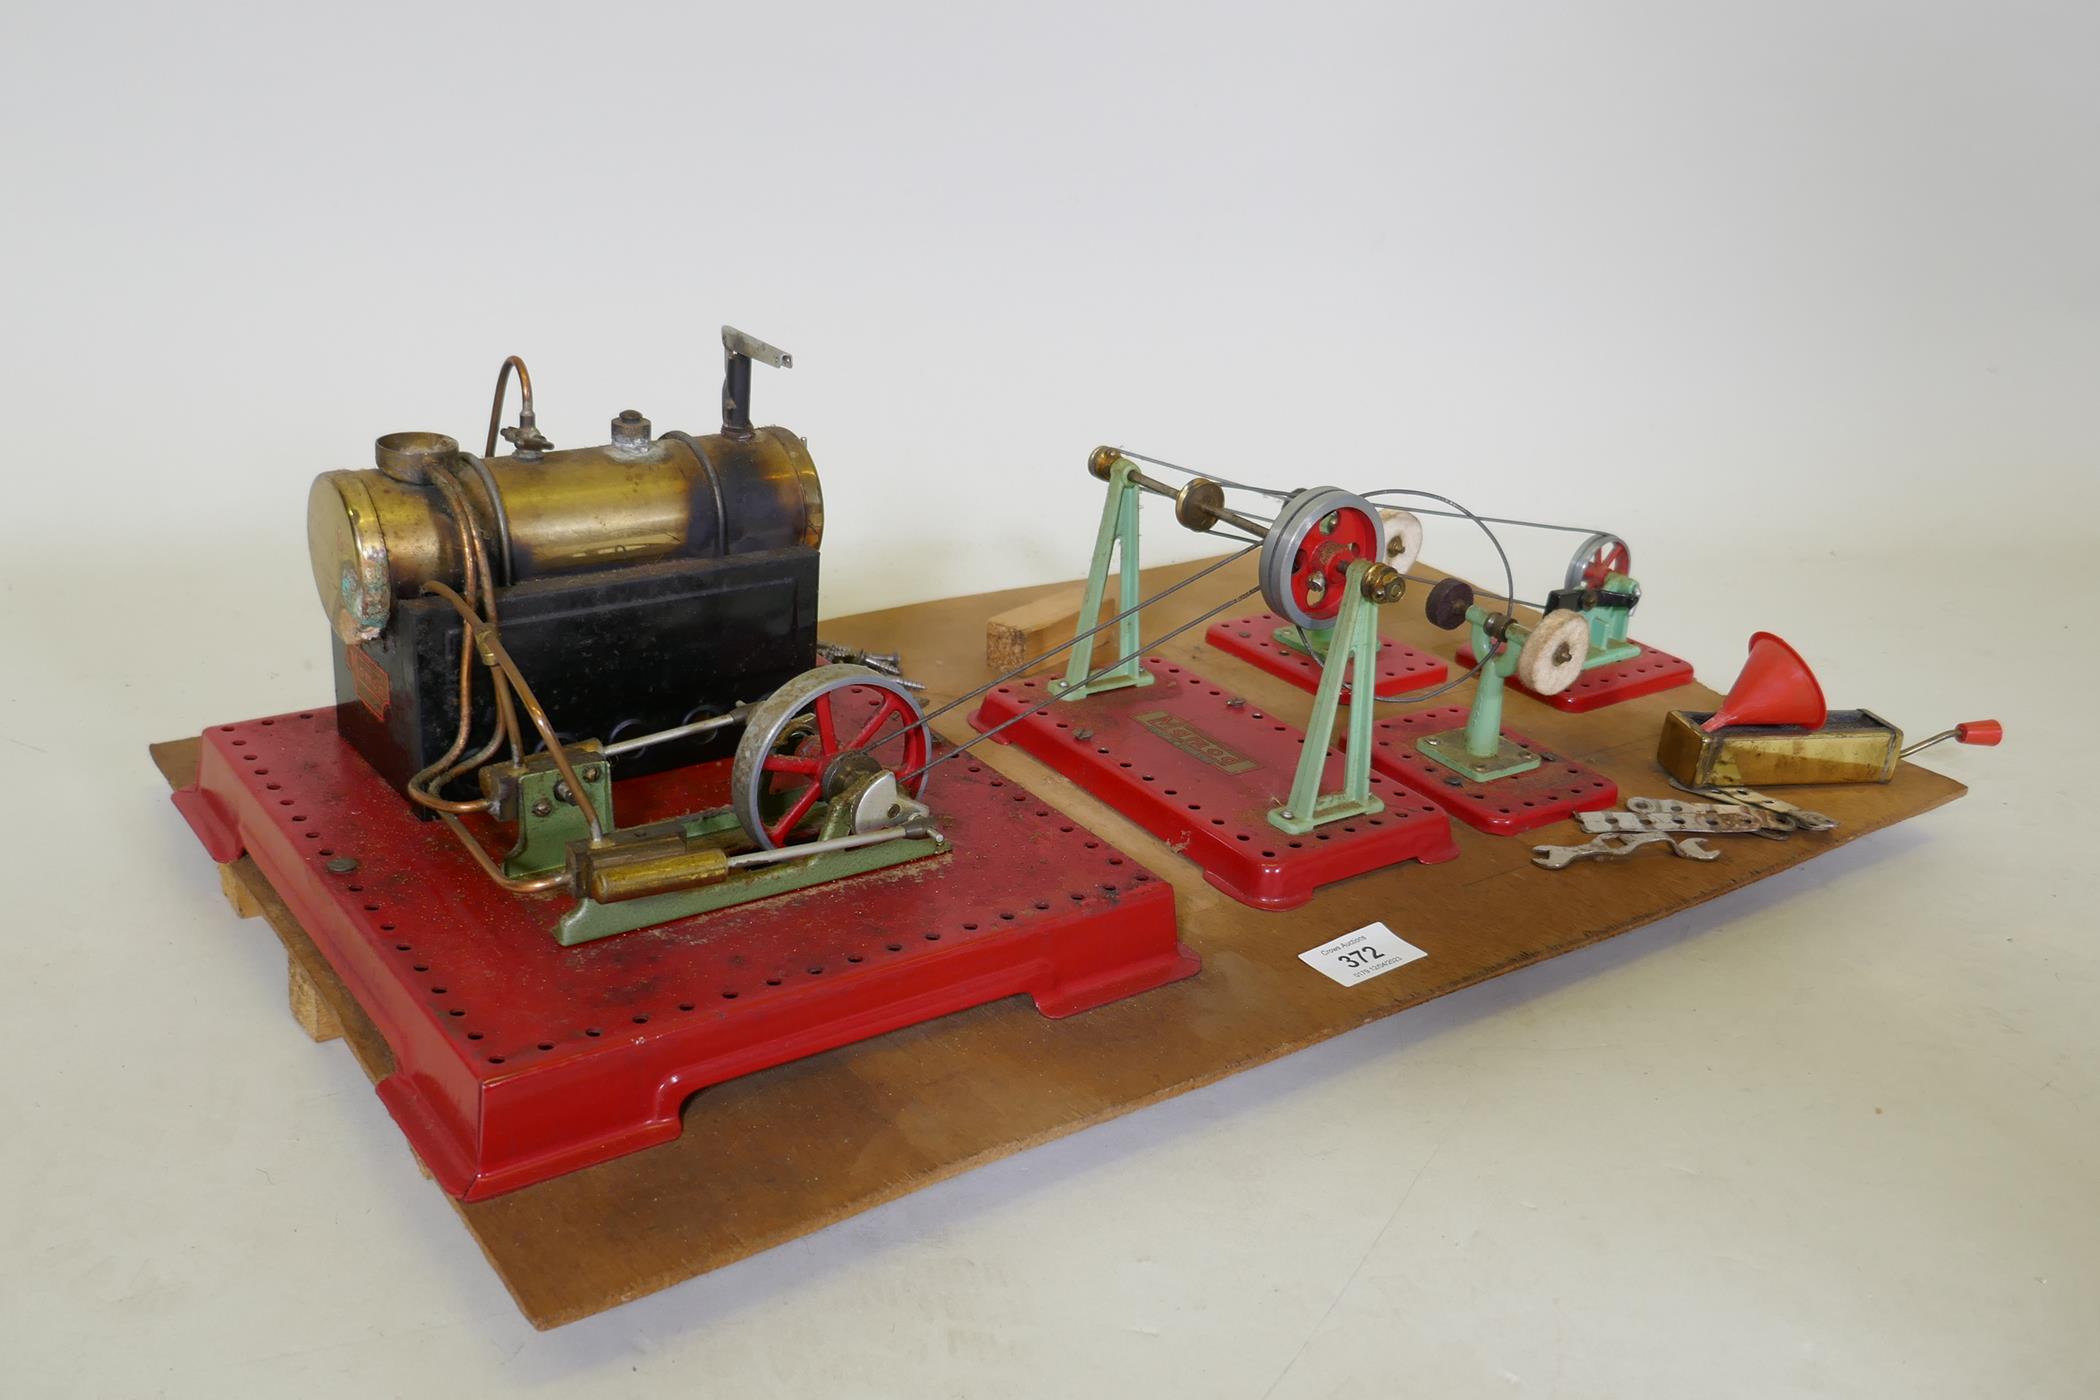 A Mamod steam driven workshop, mounted on a wood board, 60 x 35cm - Image 3 of 3